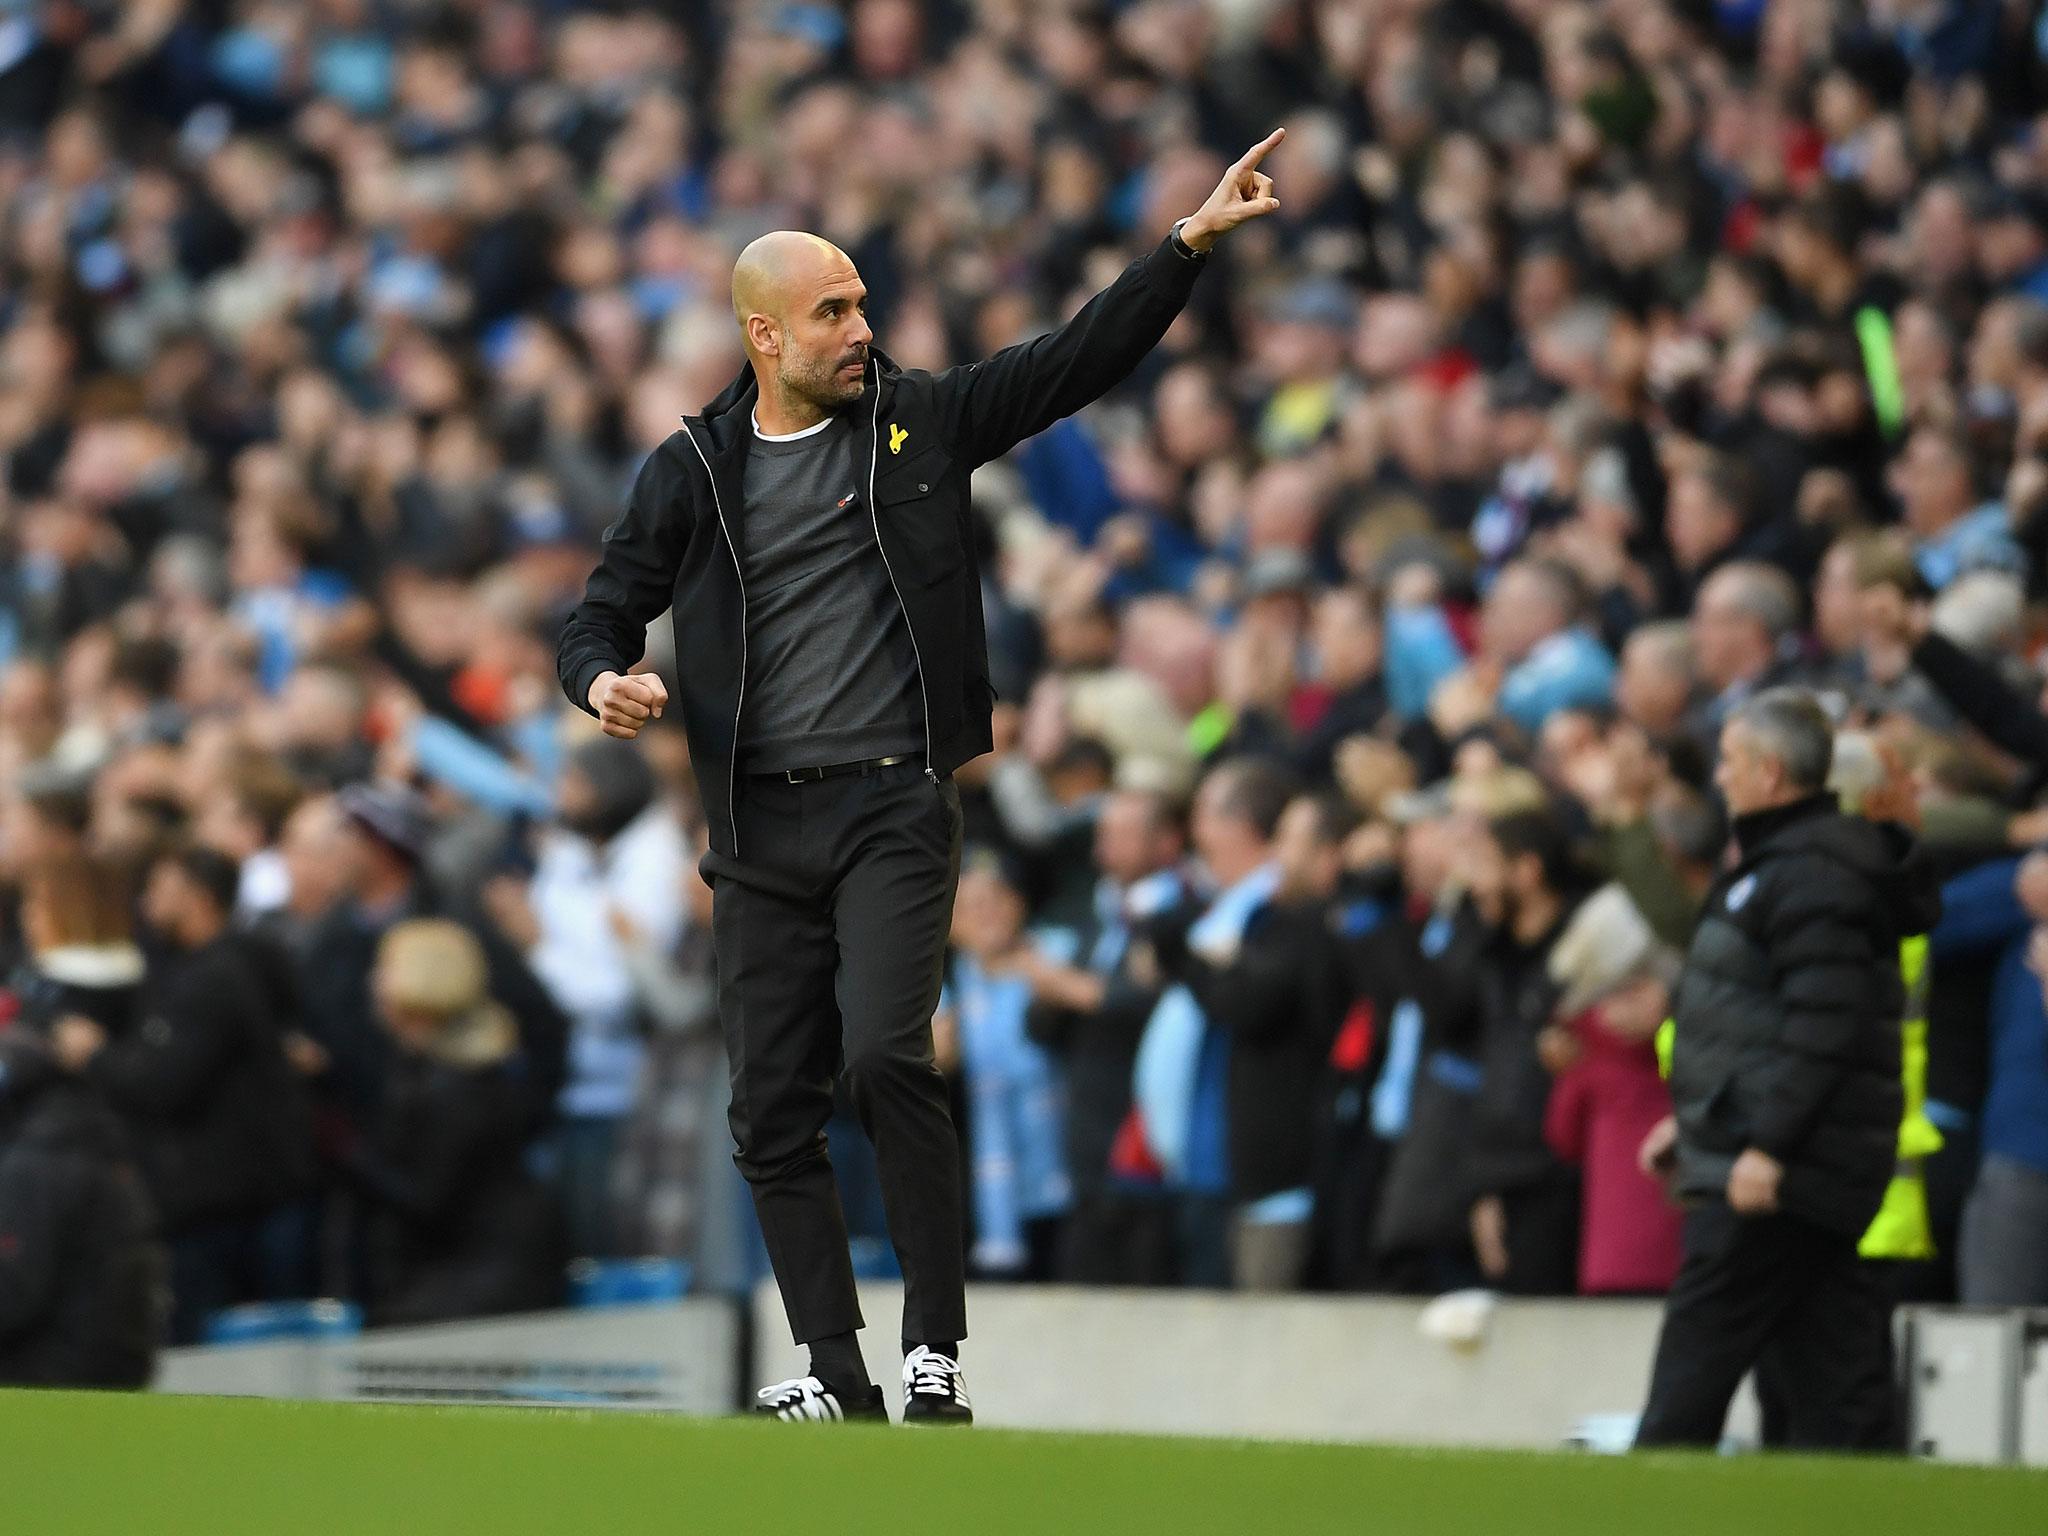 Pep Guardiola's commitment to his own philosophy has not waivered since that defeat against Leicester